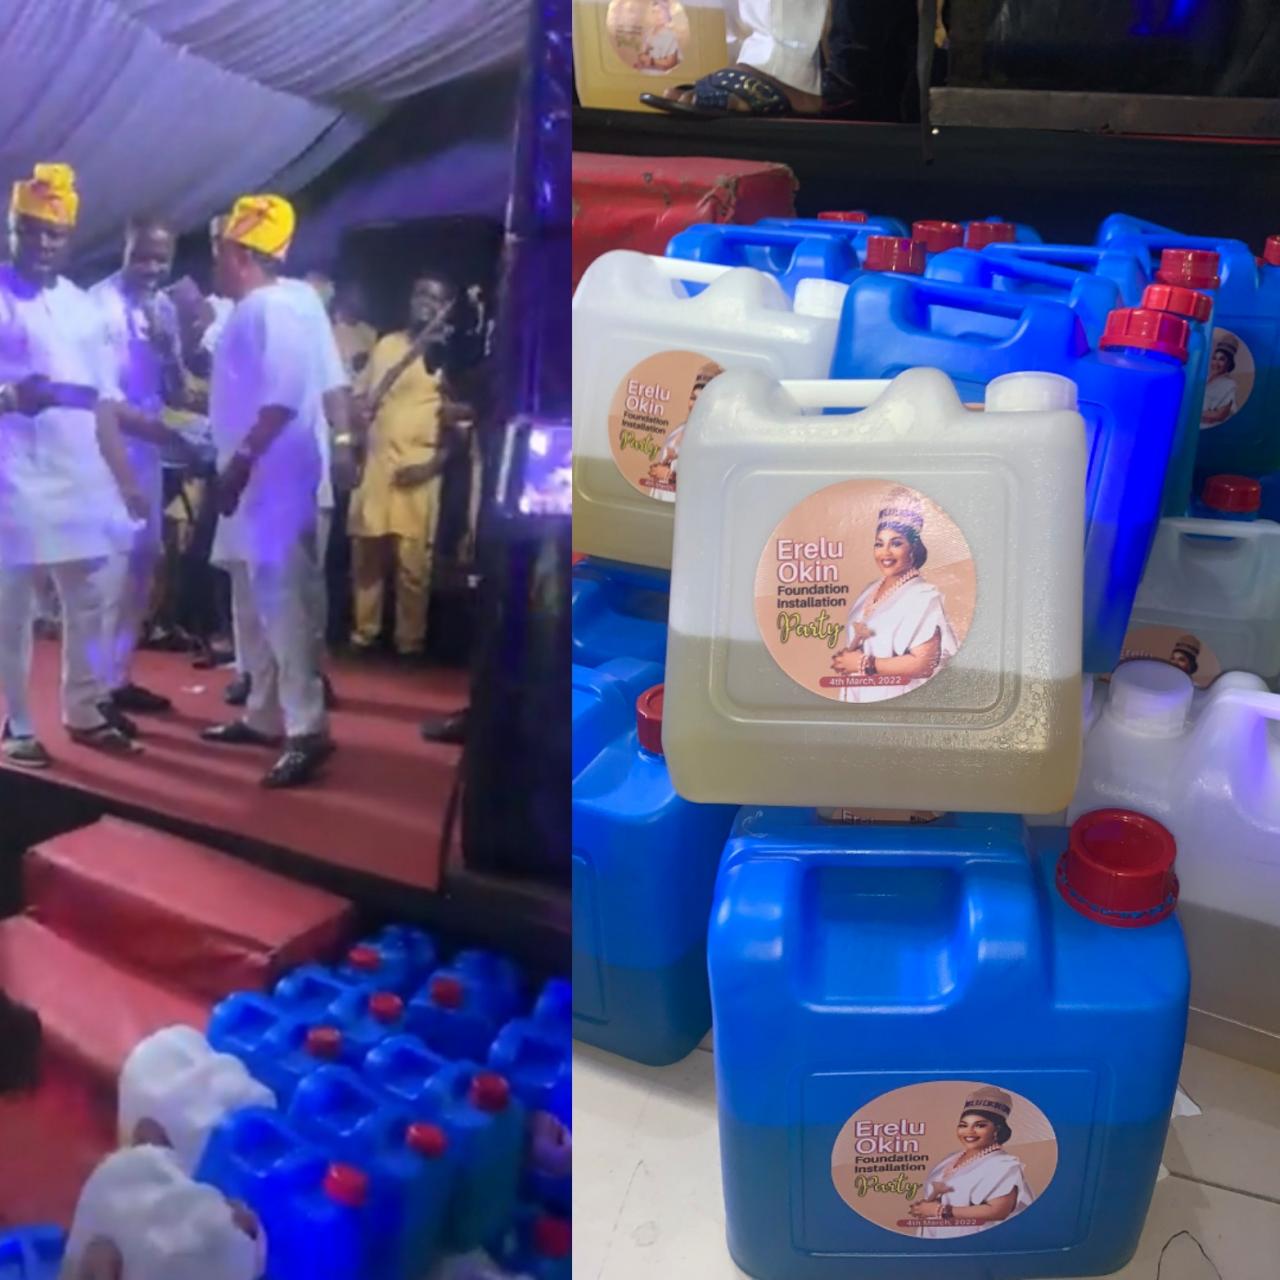 "It is dangerous"-Lagos state govt kicks as petrol is given as souvenir at a party, vows to make all involved in it account for their action 